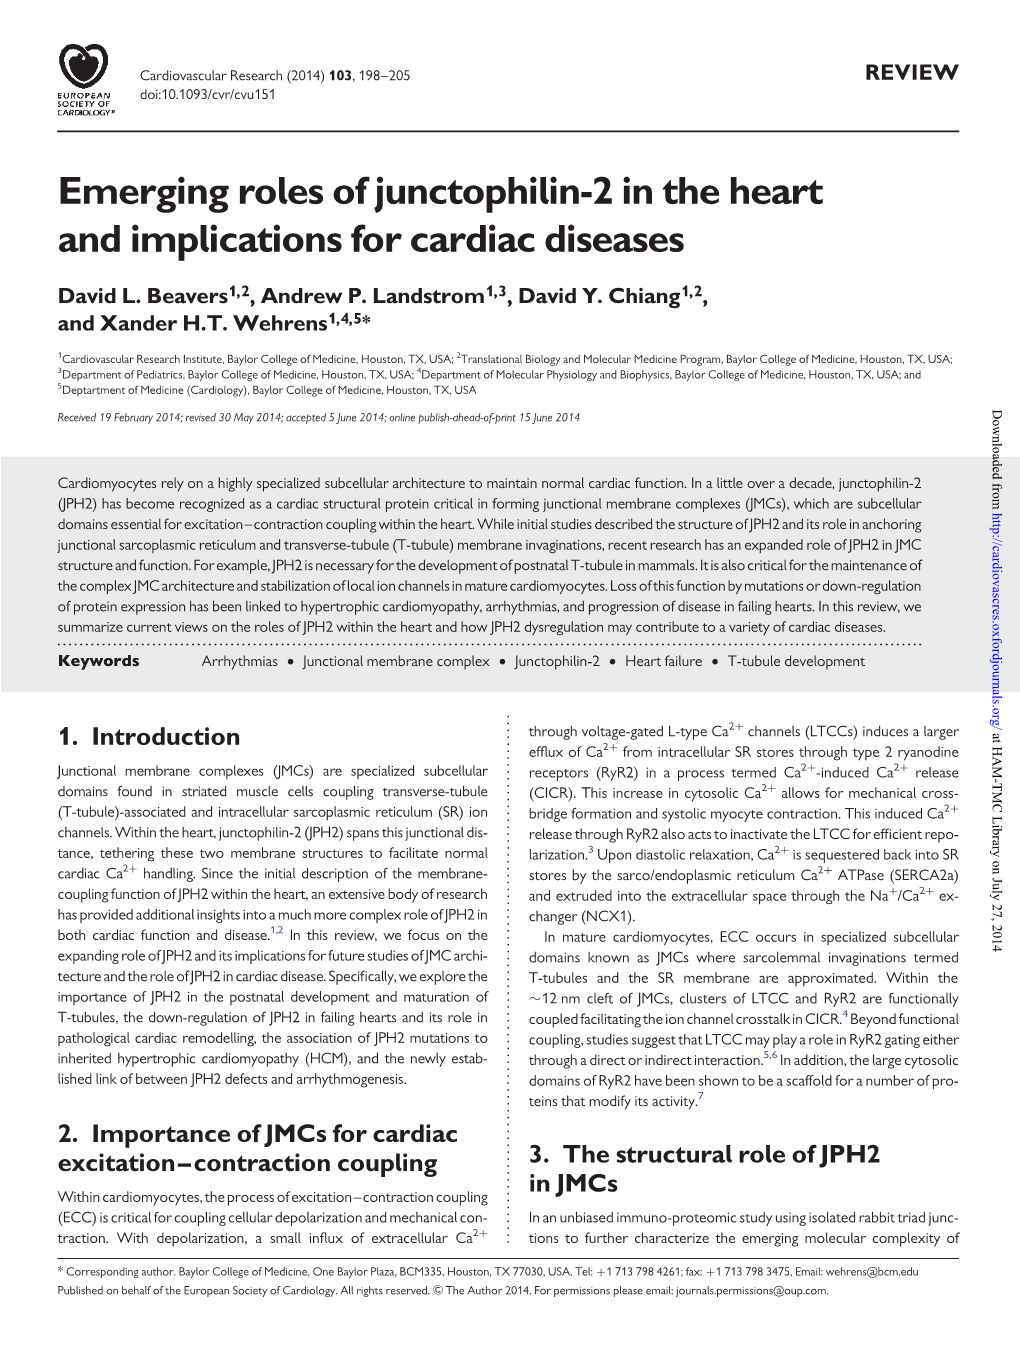 Emerging Roles of Junctophilin-2 in the Heart and Implications for Cardiac Diseases